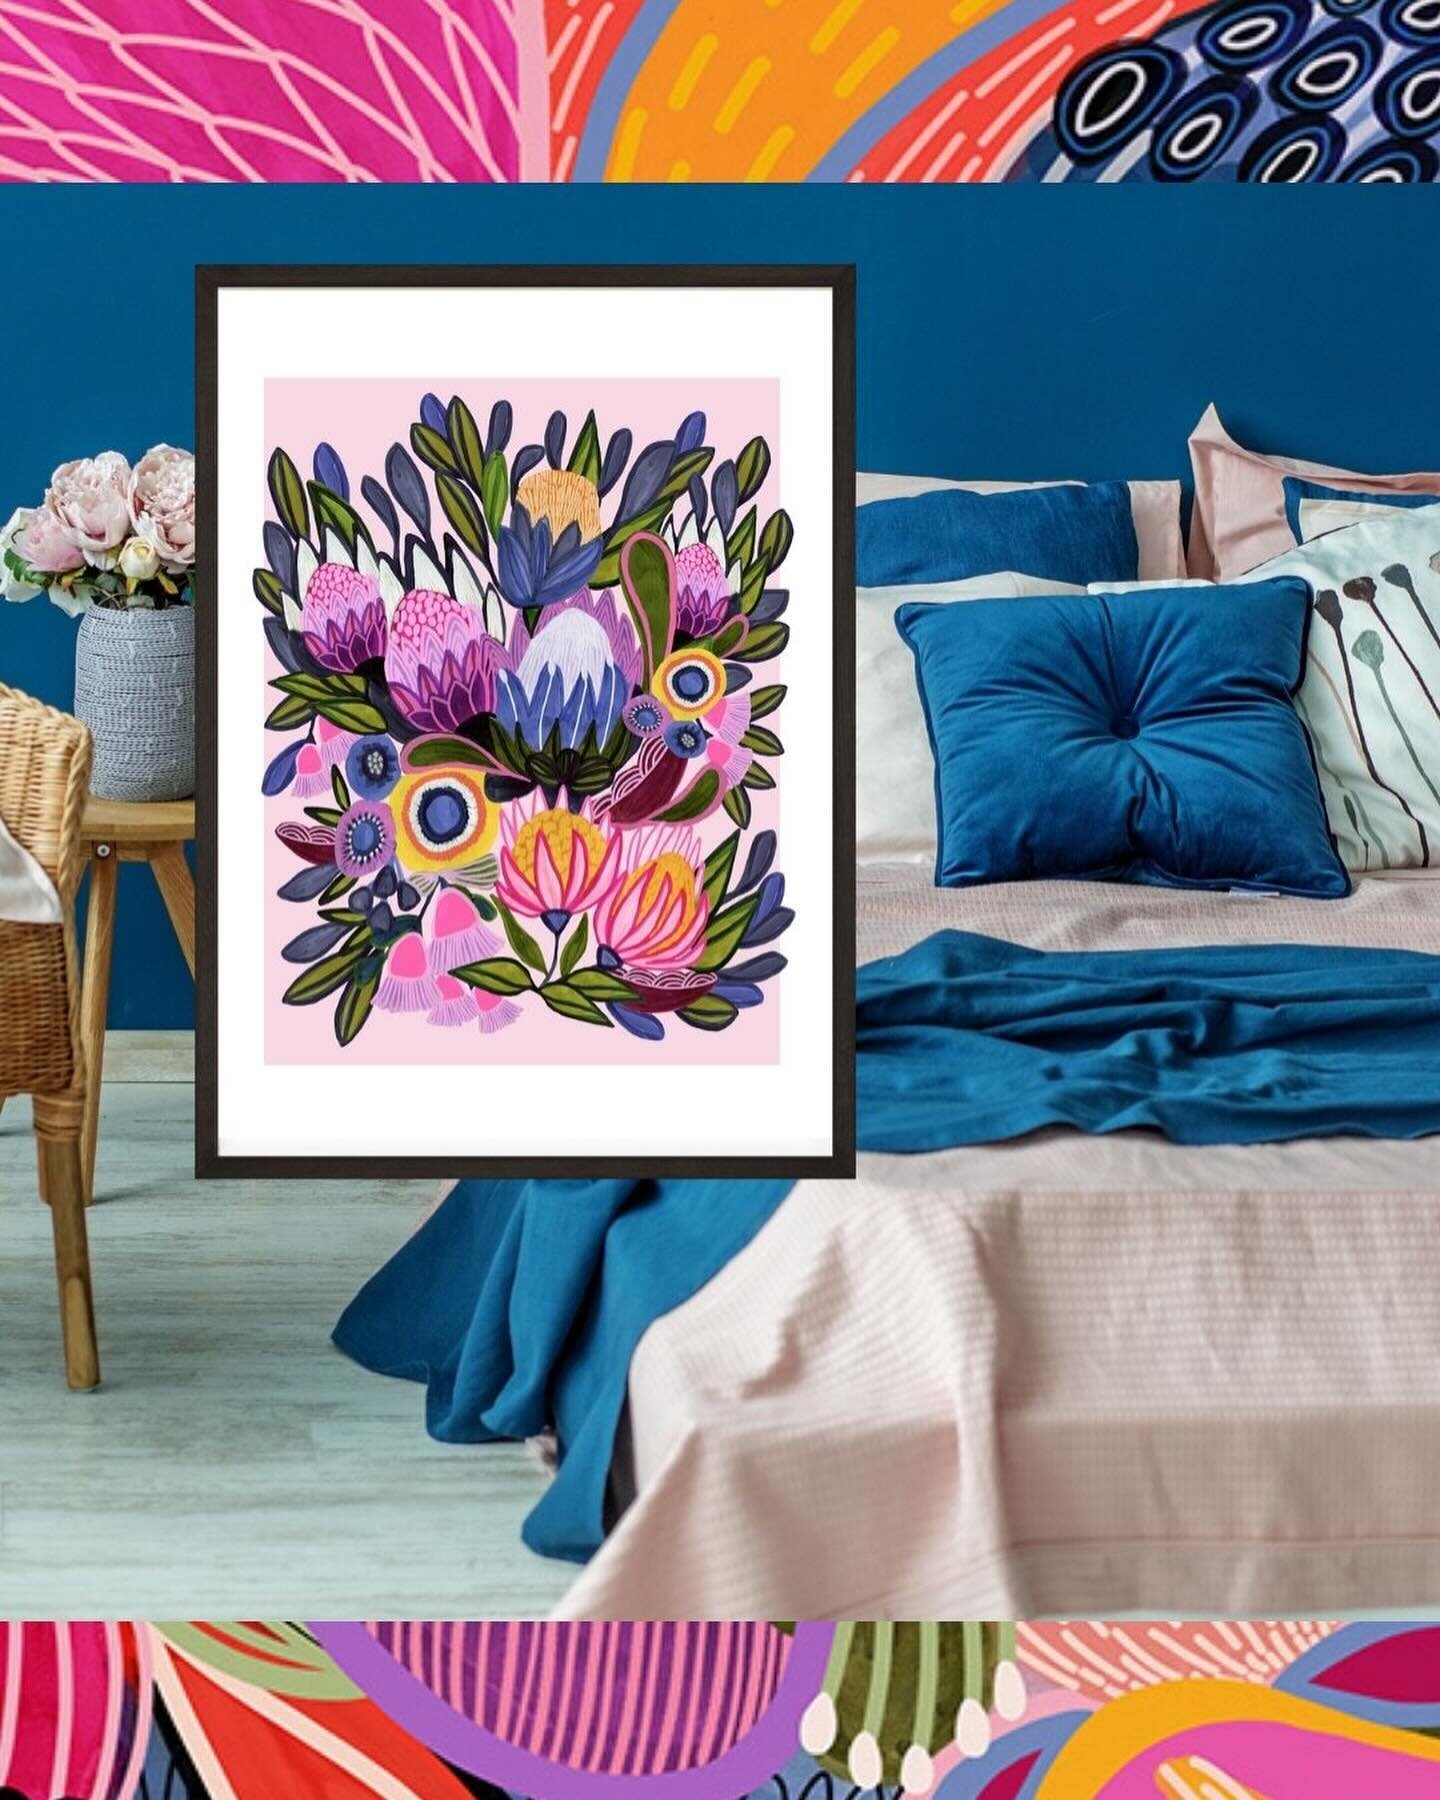 &ldquo;Hey friends! 👋 I&rsquo;m thrilled to share my passion for modern botanical paintings with you. Each piece of art is inspired by native flowers and bursting with vibrant colors, they are more than just a decoration &ndash; they are paintings c